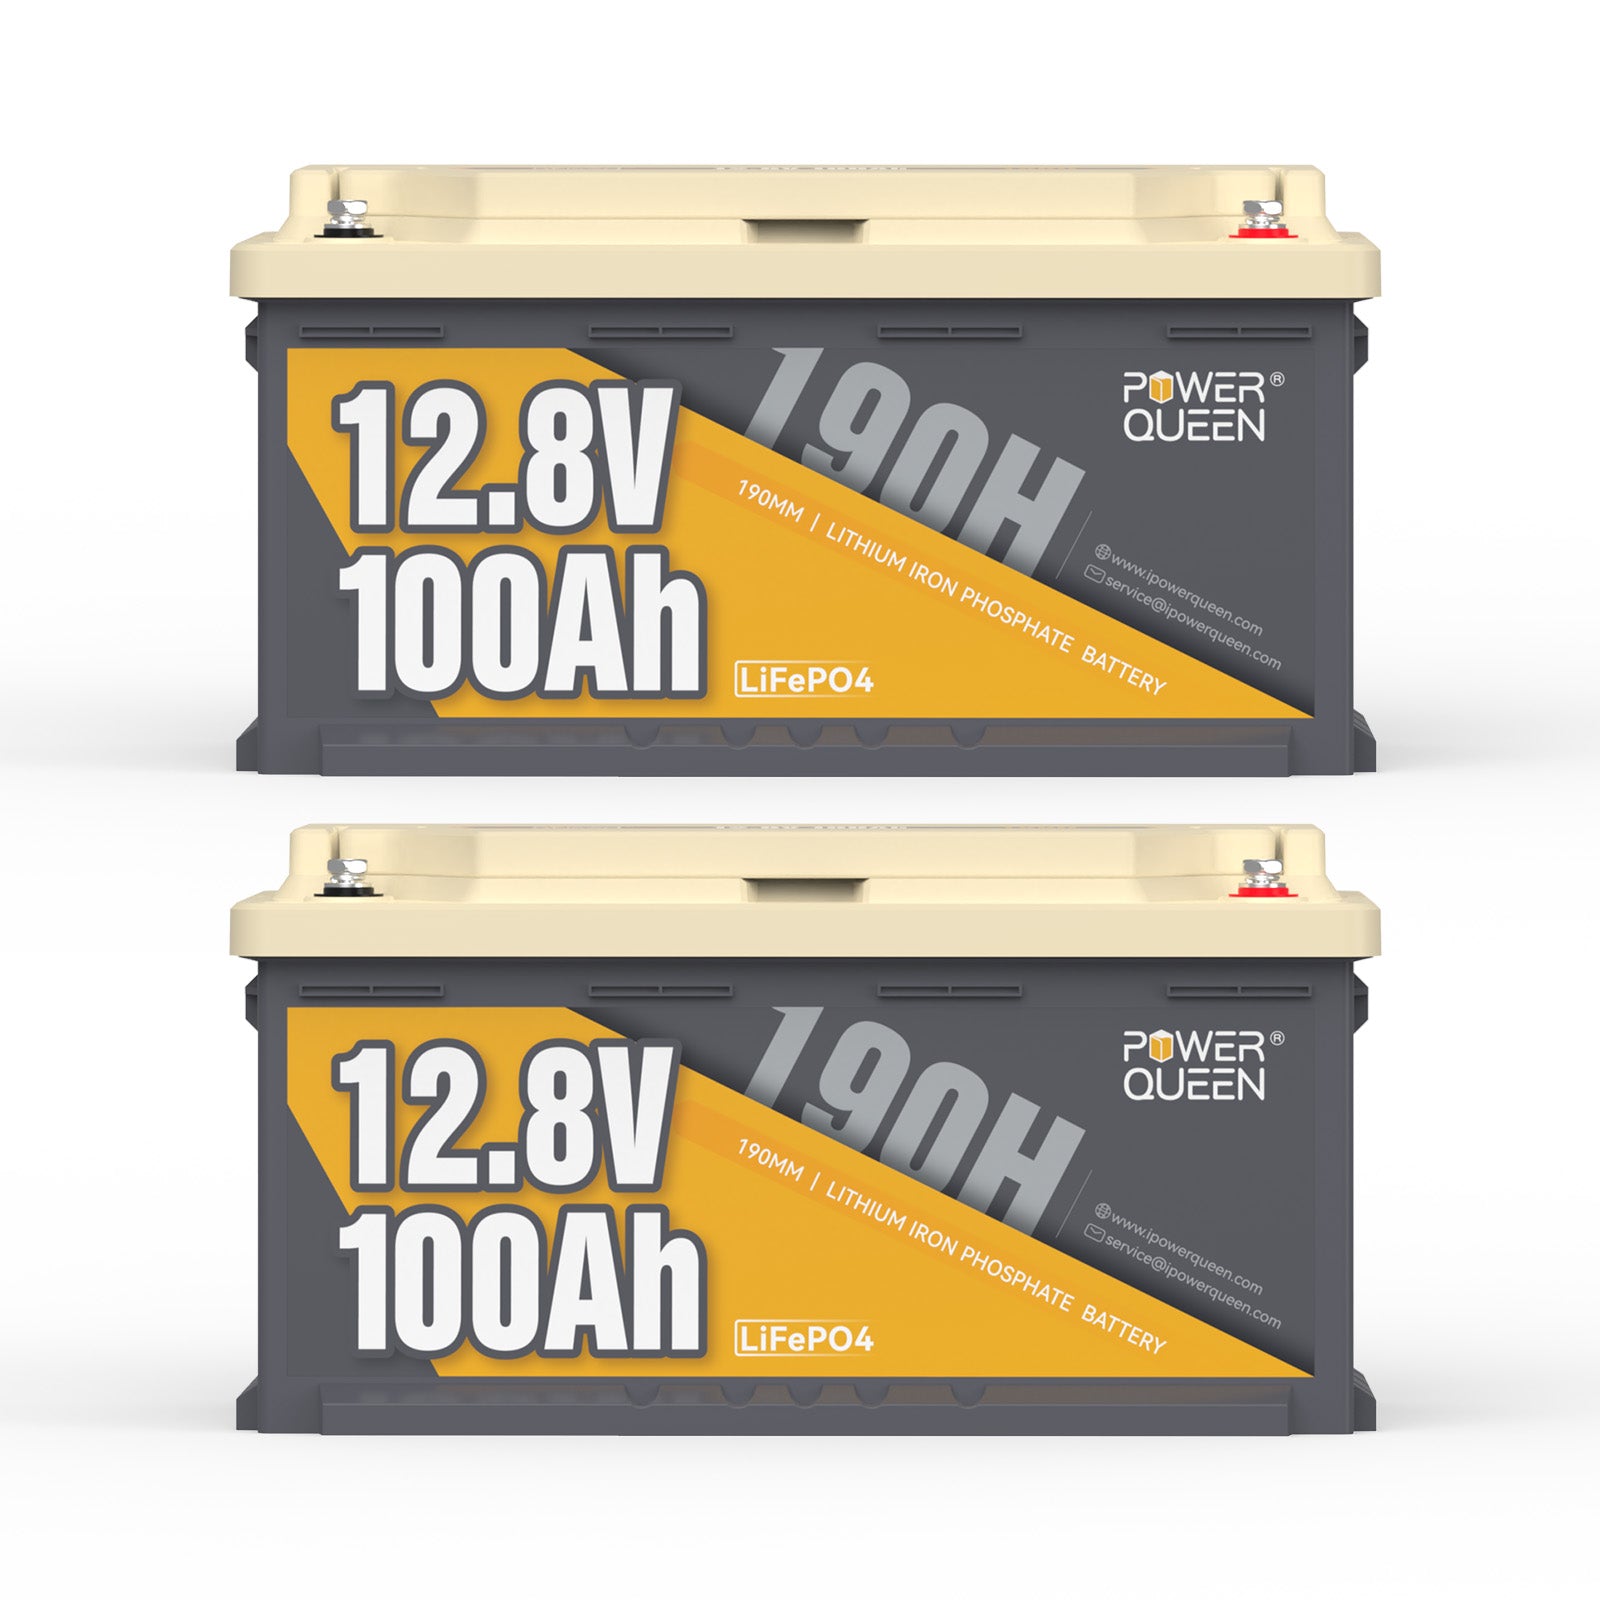 Power Queen 12.8V 100Ah 190H LiFePO4 battery for motorhome, solar system